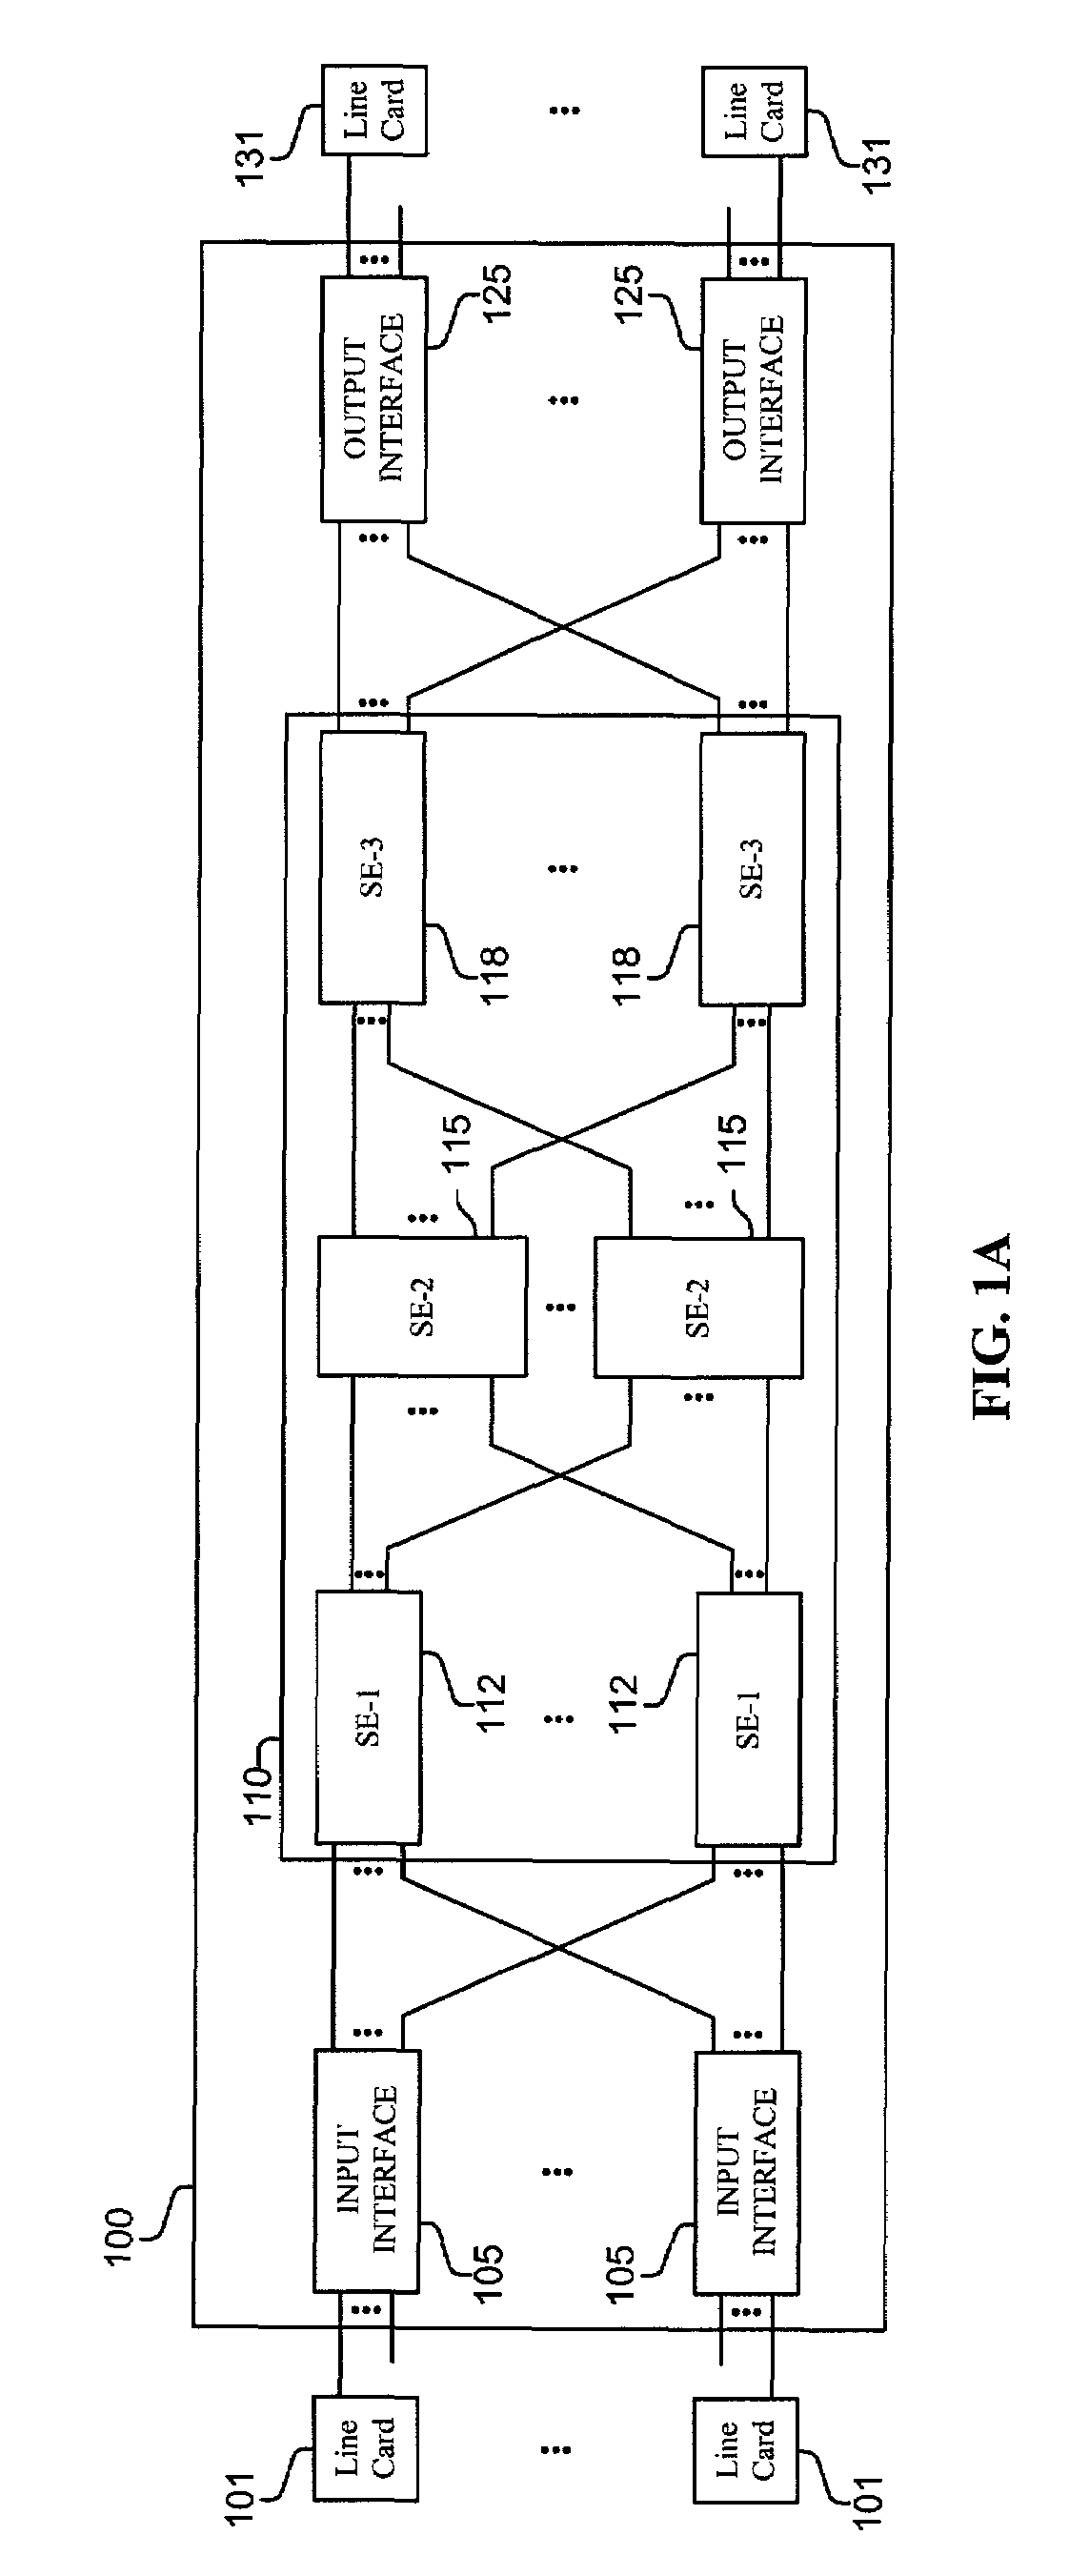 Method and apparatus for accumulating and distributing traffic and flow control information in a packet switching system